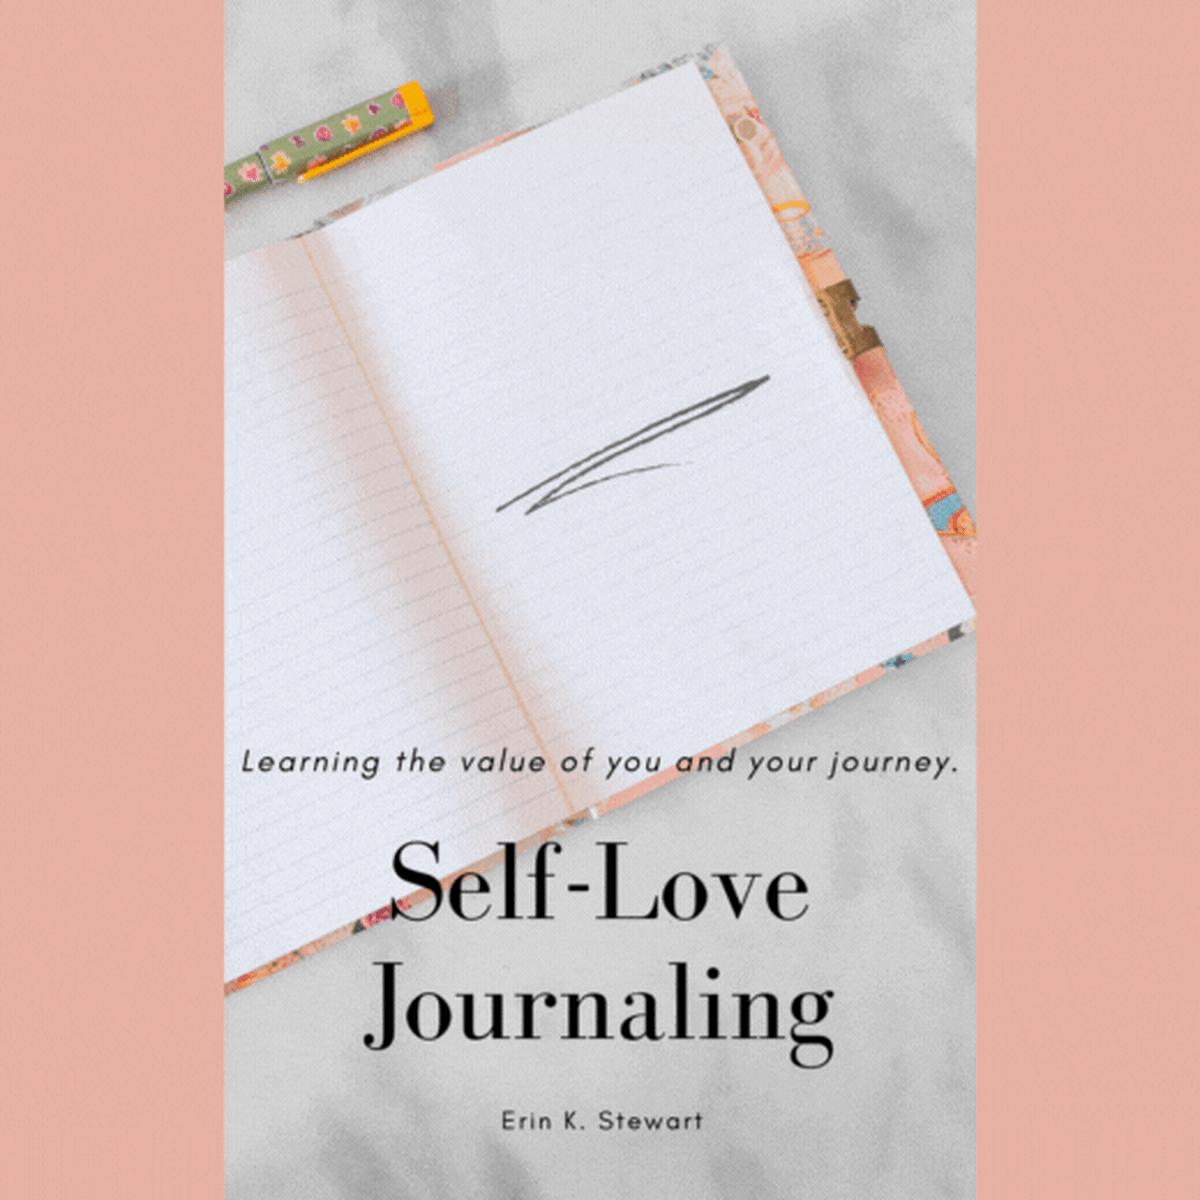 How to Journal for Self-Love